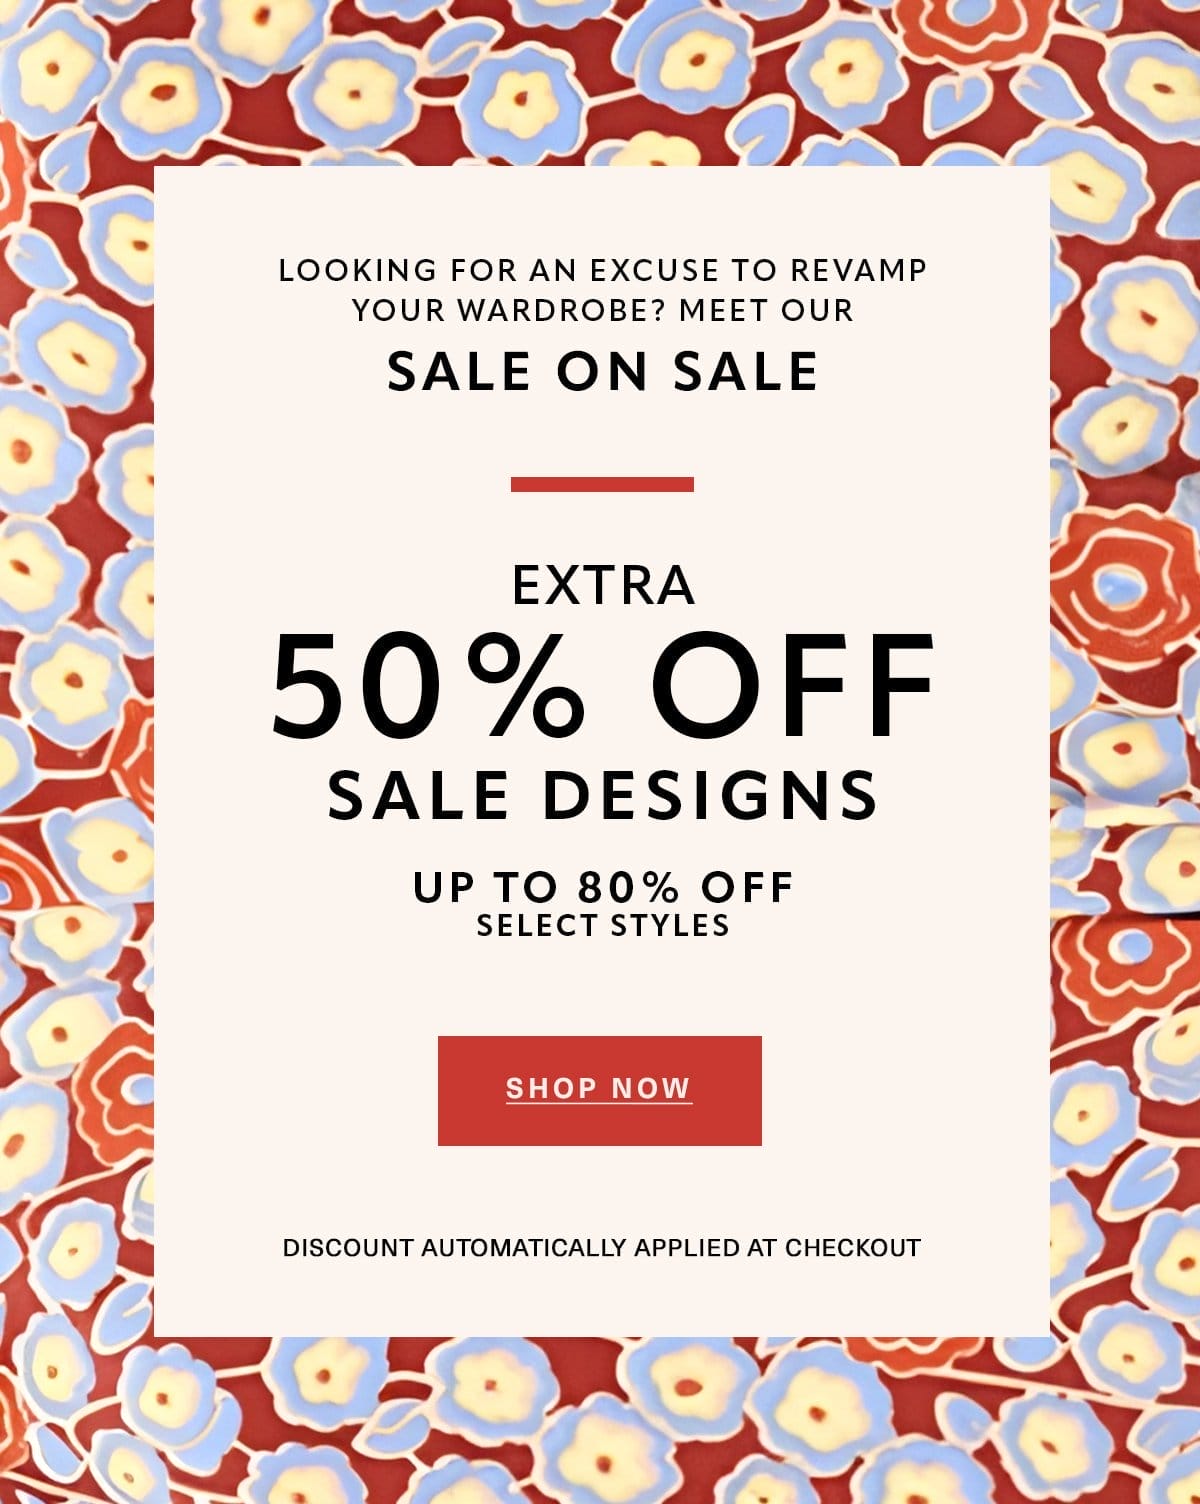 Looking for an excuse to revamp your wardrobe? Meet our SALE ON SALE EXTRA 50% OFF SALE DESIGNS UP TO 80% OFF SELECT STYLES Discount Automatically Applied at Checkout SHOP NOW